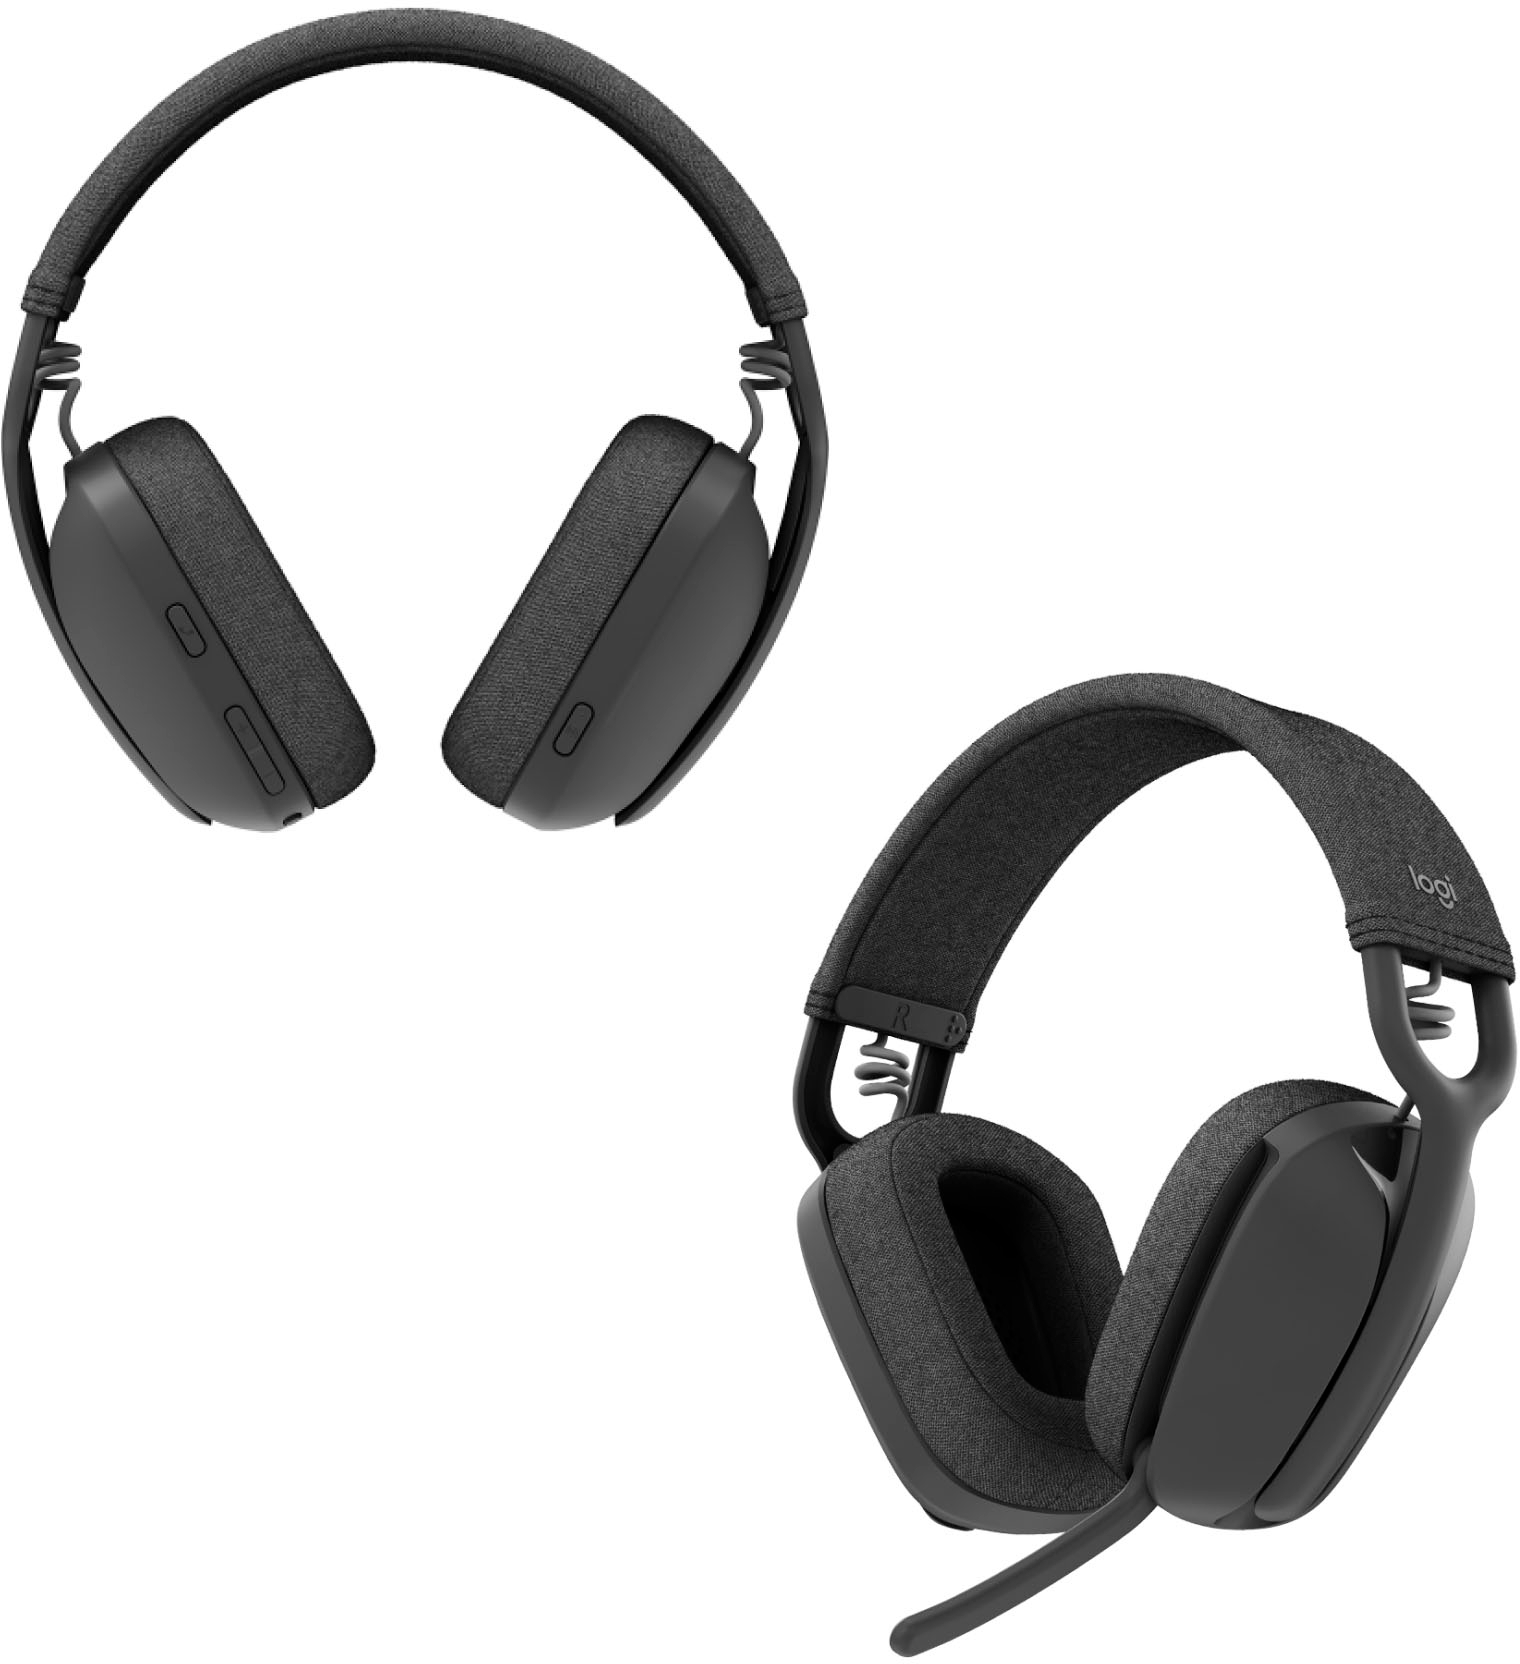 Vibe Zone 100 Over Best Logitech Noise-Cancelling Bluetooth with Headphones 981-001256 Microphone Ear Buy - Graphite